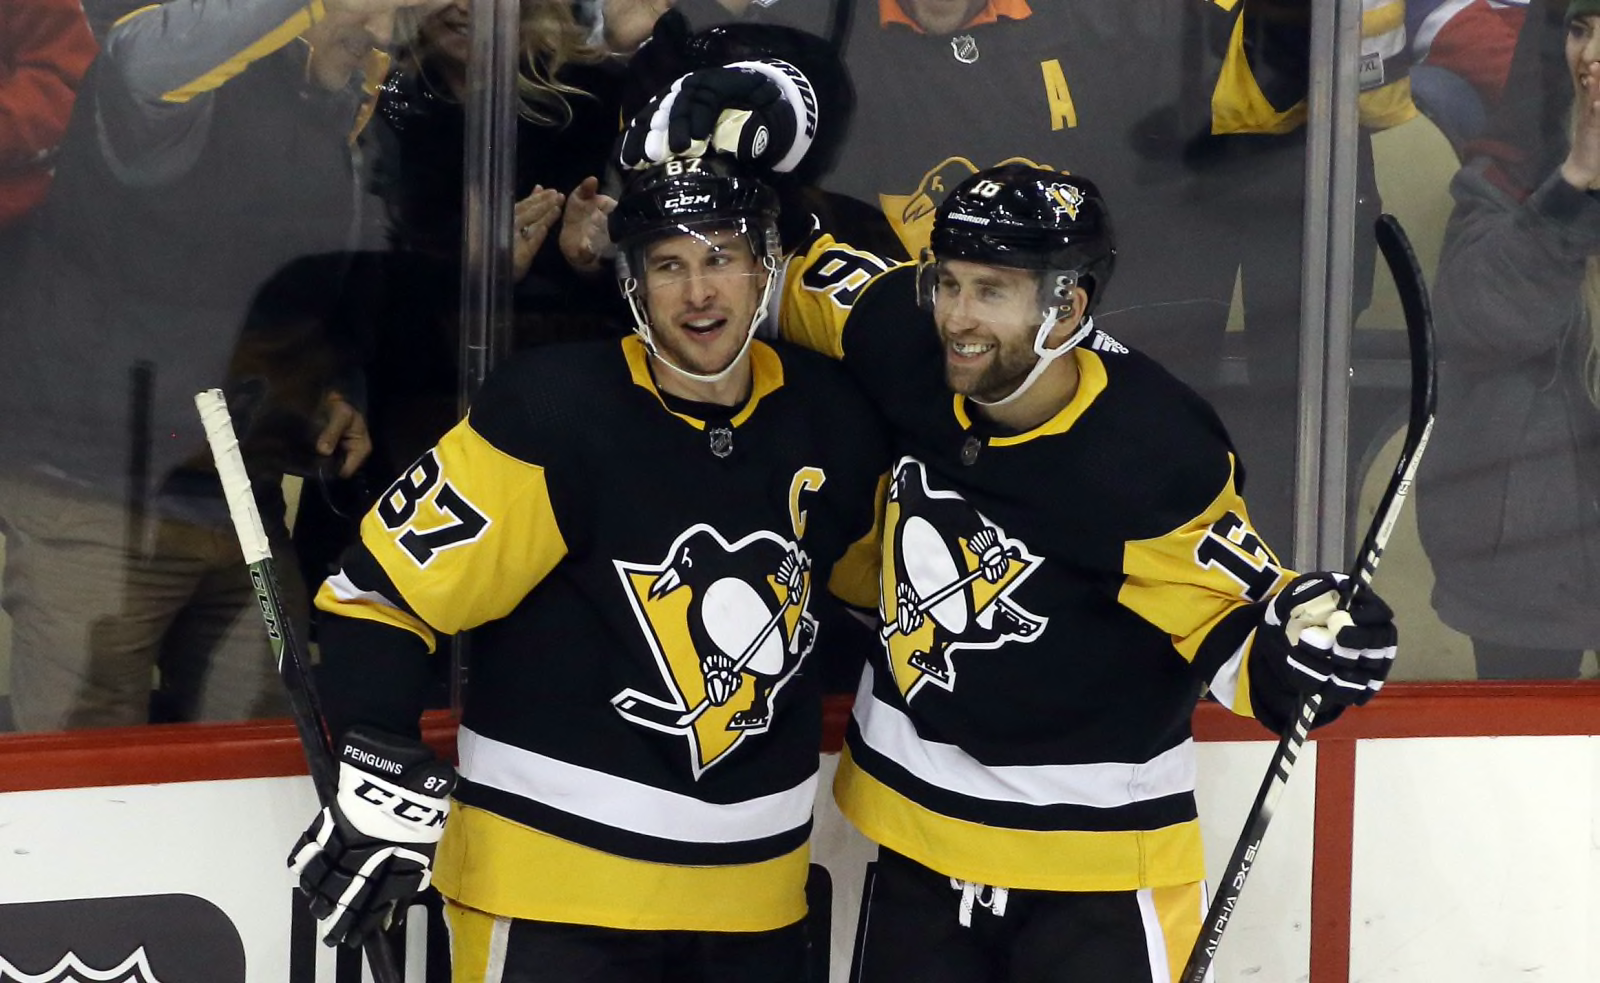 Sidney Crosby, Evgeni Malkin and Stanley Cup immortality